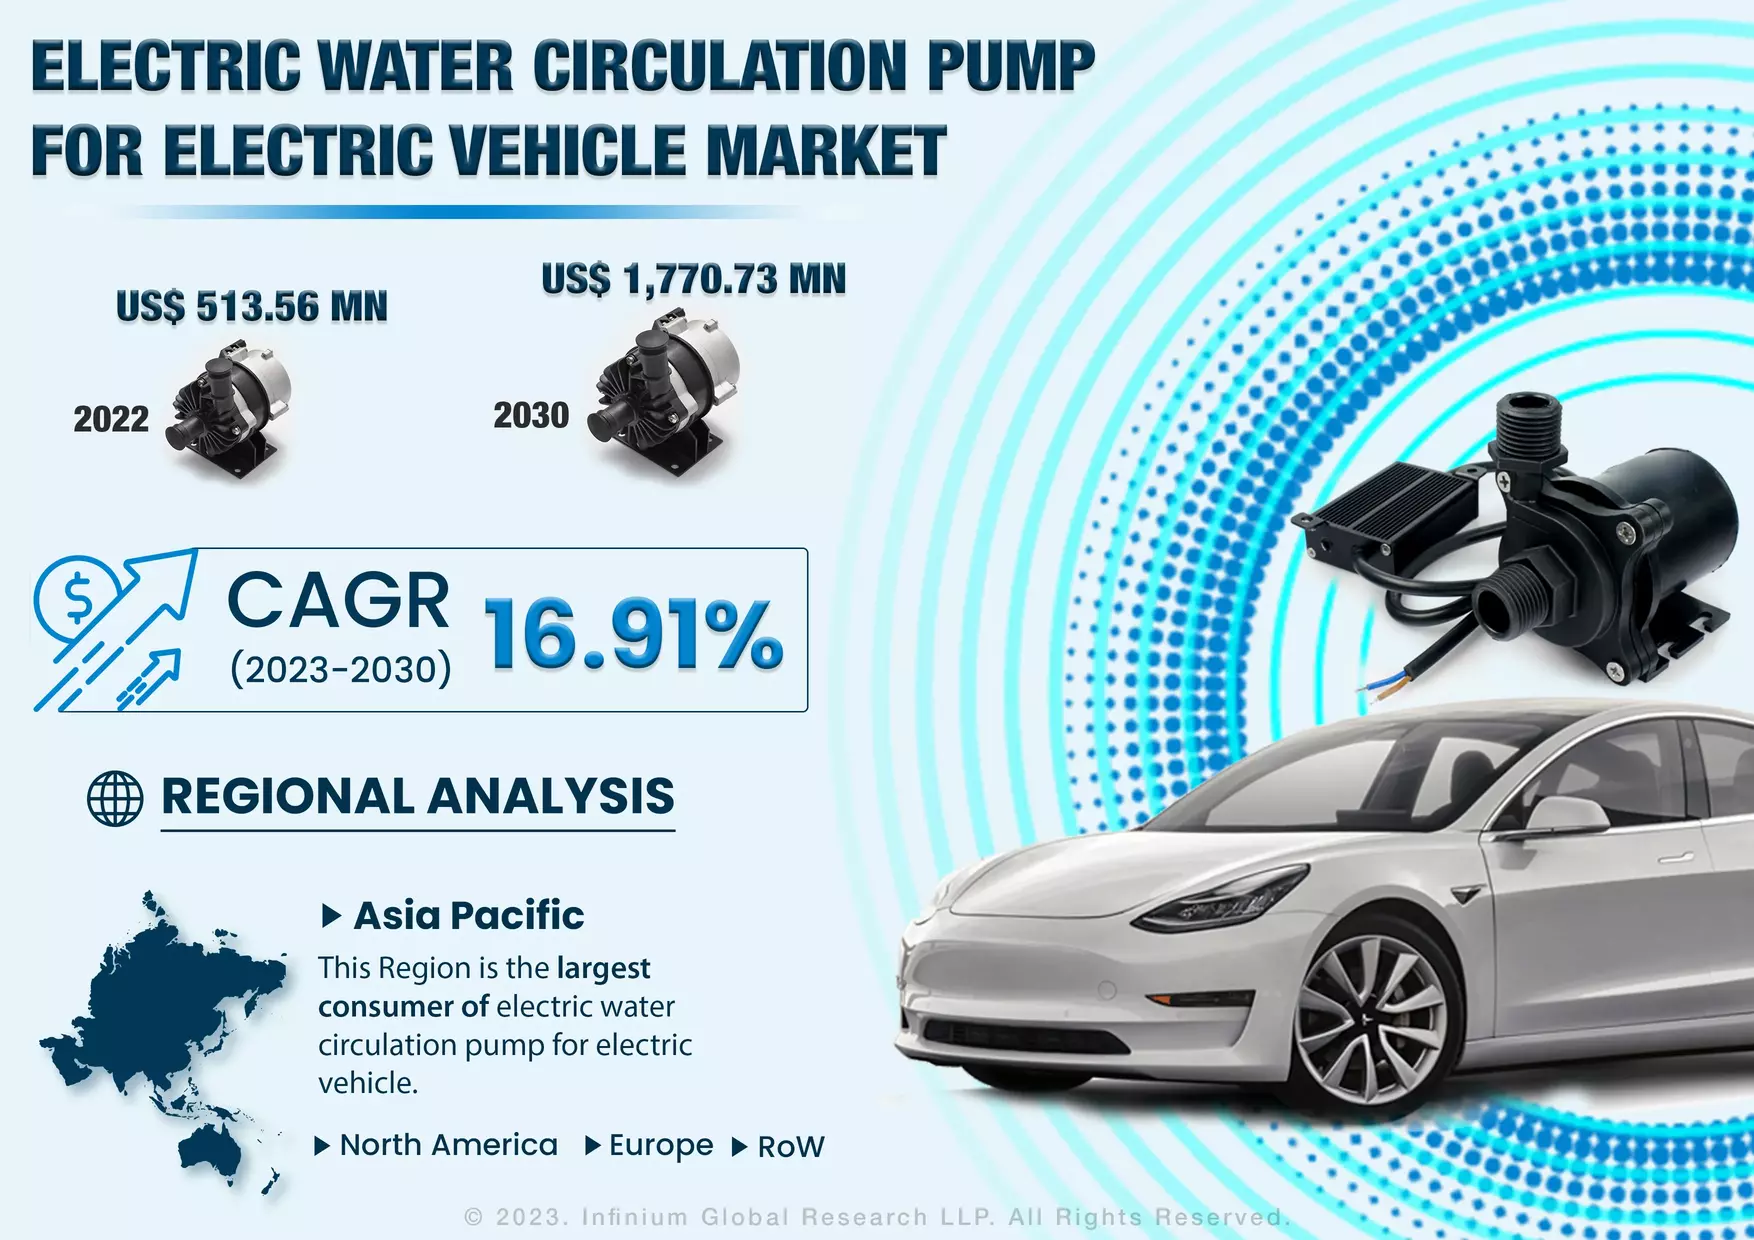 Global Electric Water Circulation Pump for Electric Vehicle Market was Valued at 513.56 Million in 2022 and is Expected to Reach 1770.7 Million in 2030, With a CAGR of 16.90% During the Forecast Period 2023-2030.